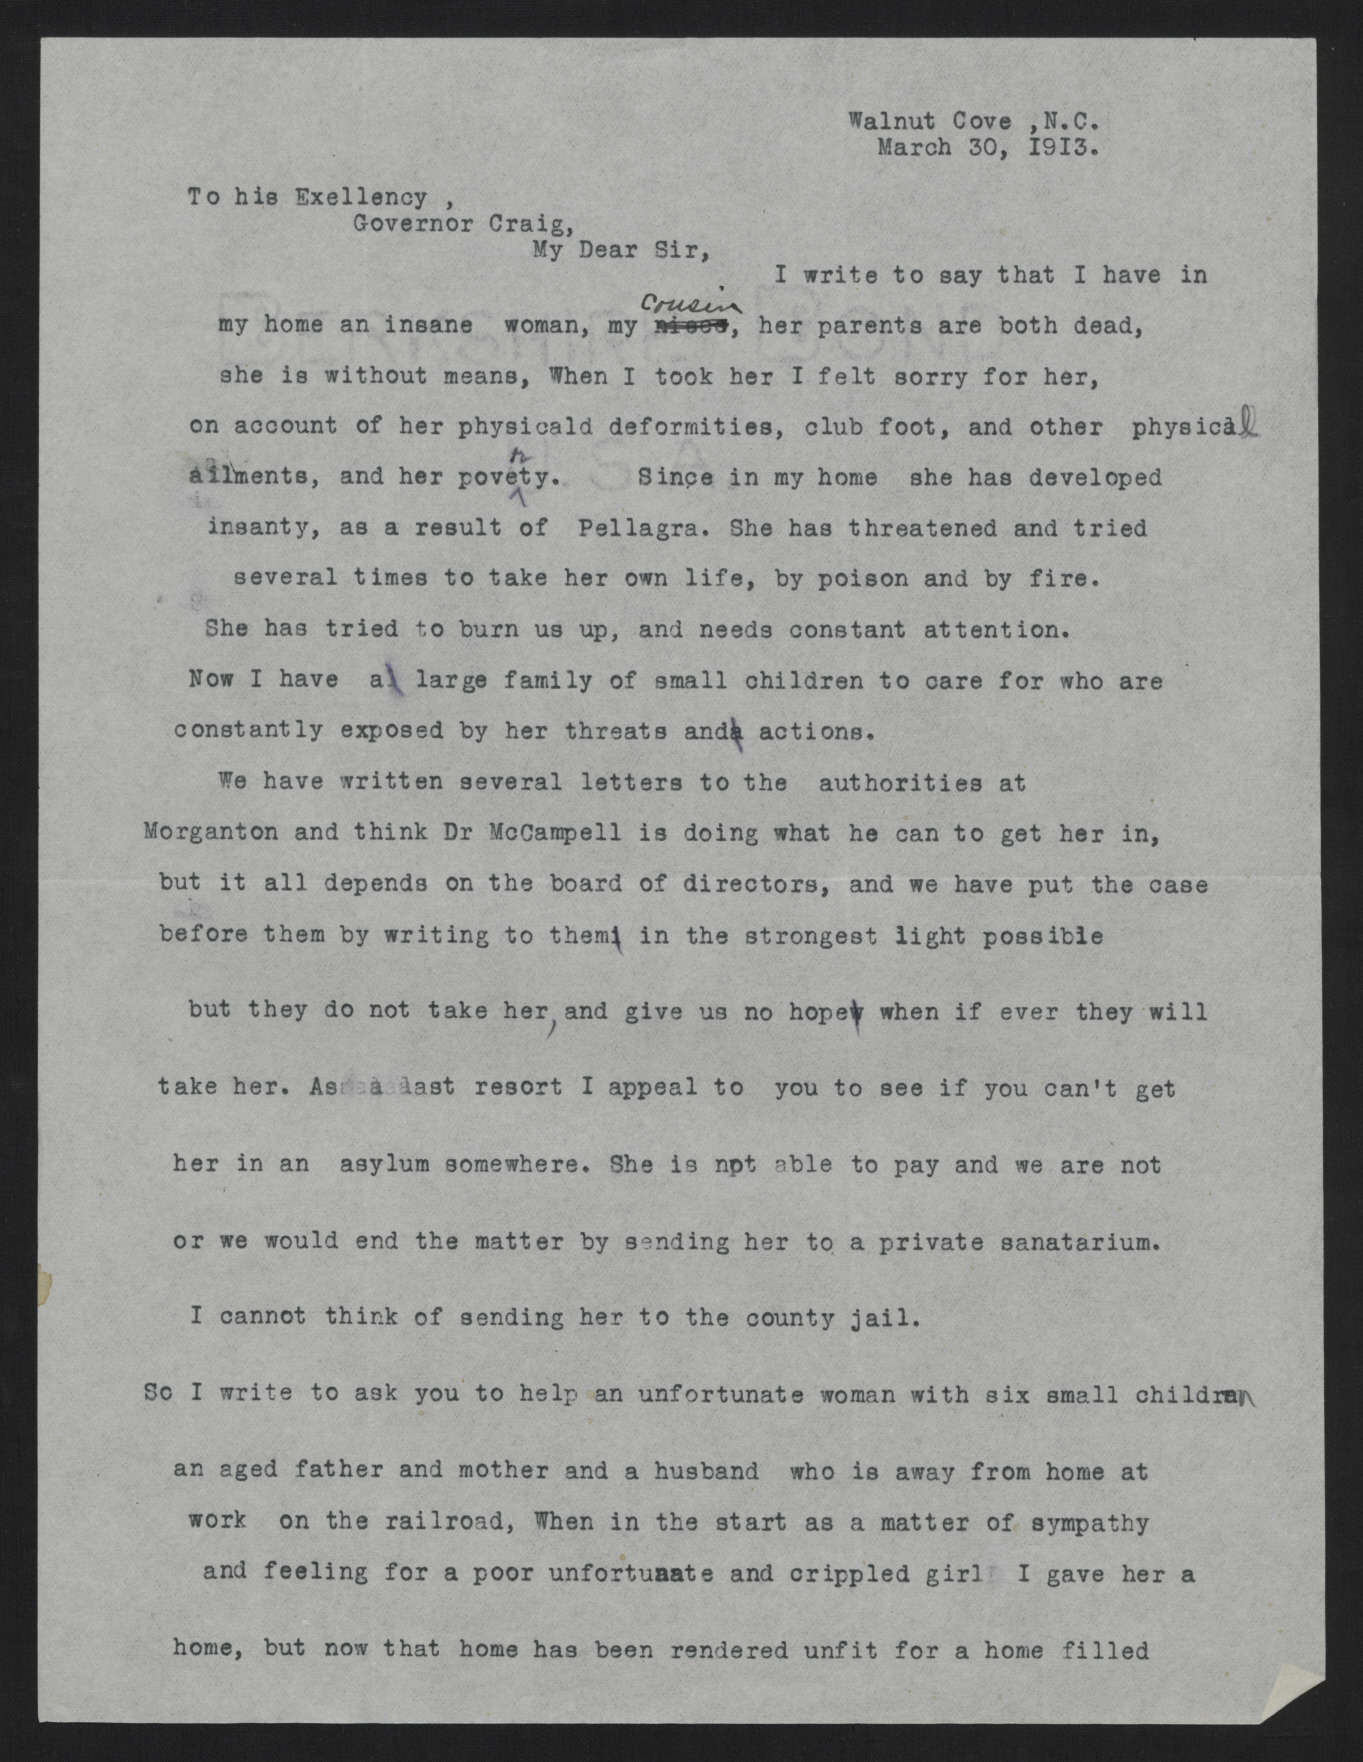 Letter from Gerrey to Craig, March 30, 1913, page 1